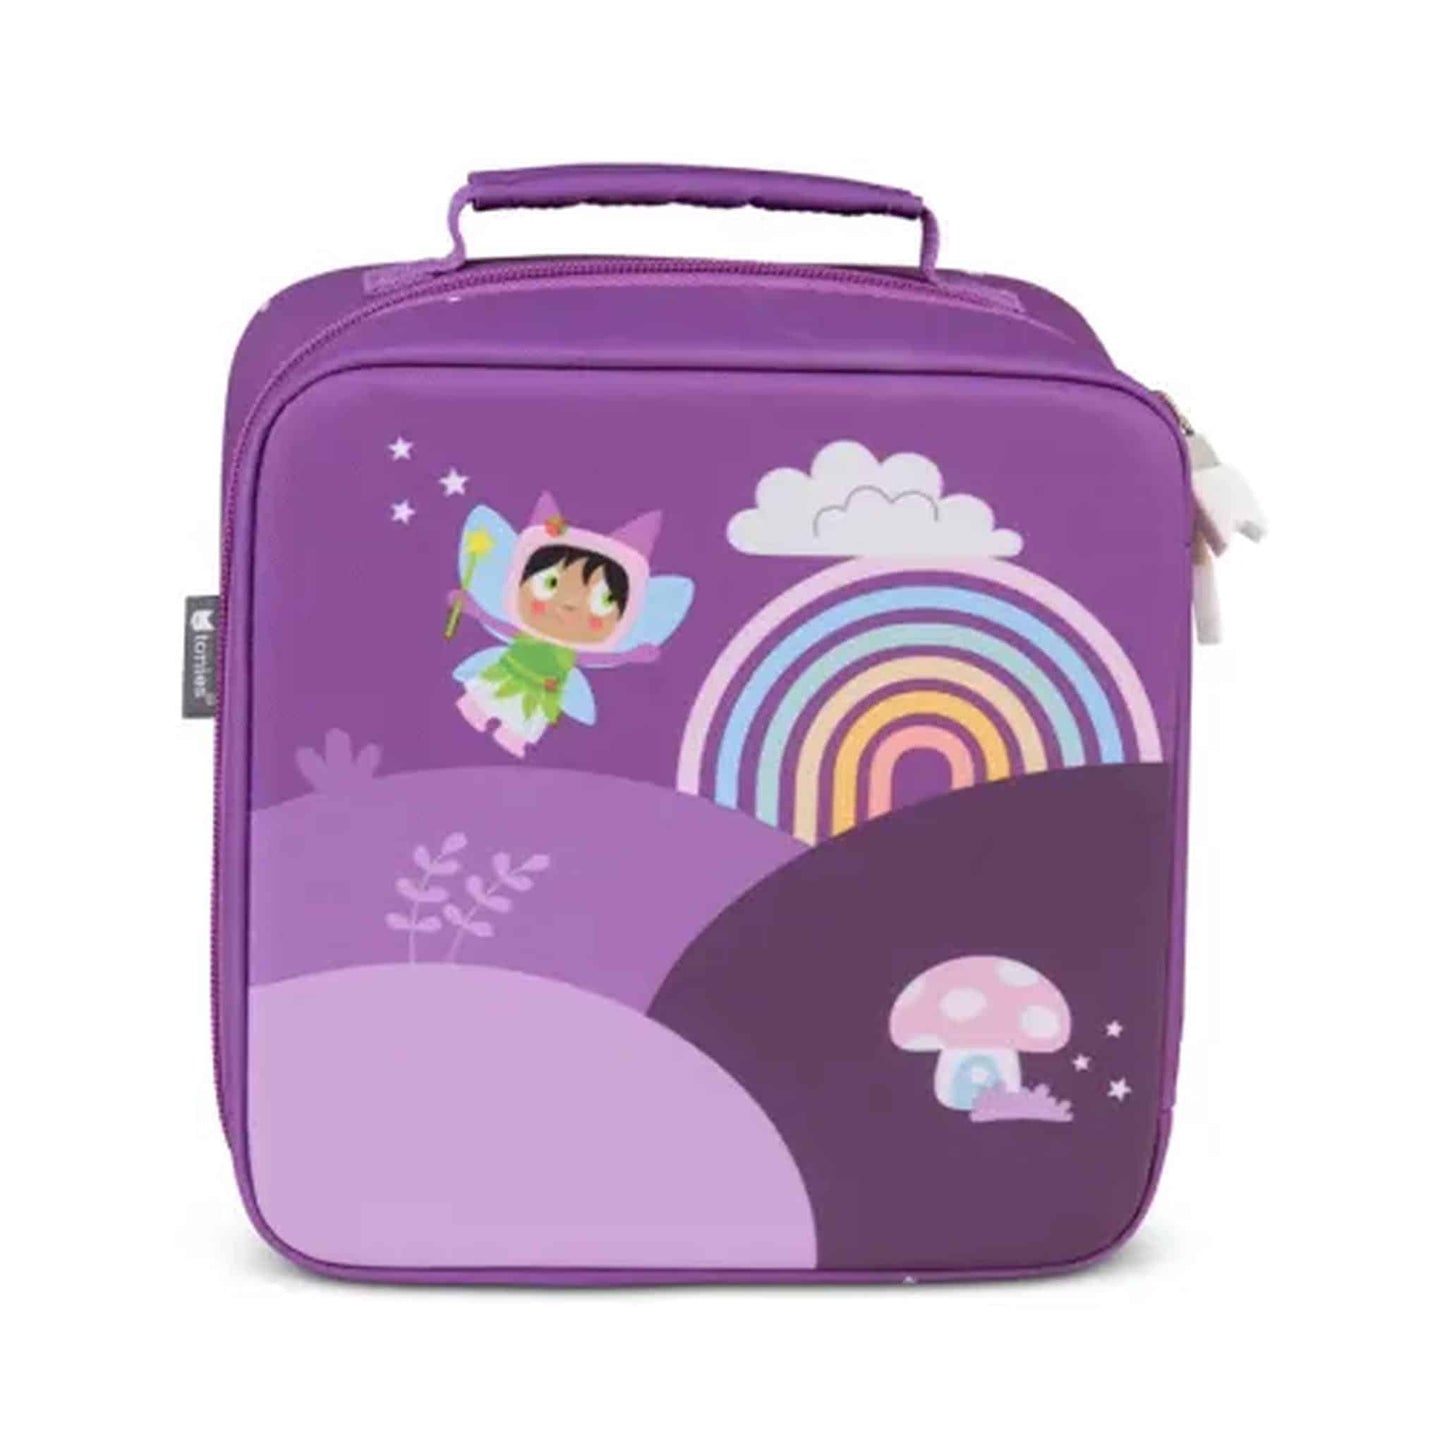 Tonies Carry Case Max Over the Rainbow